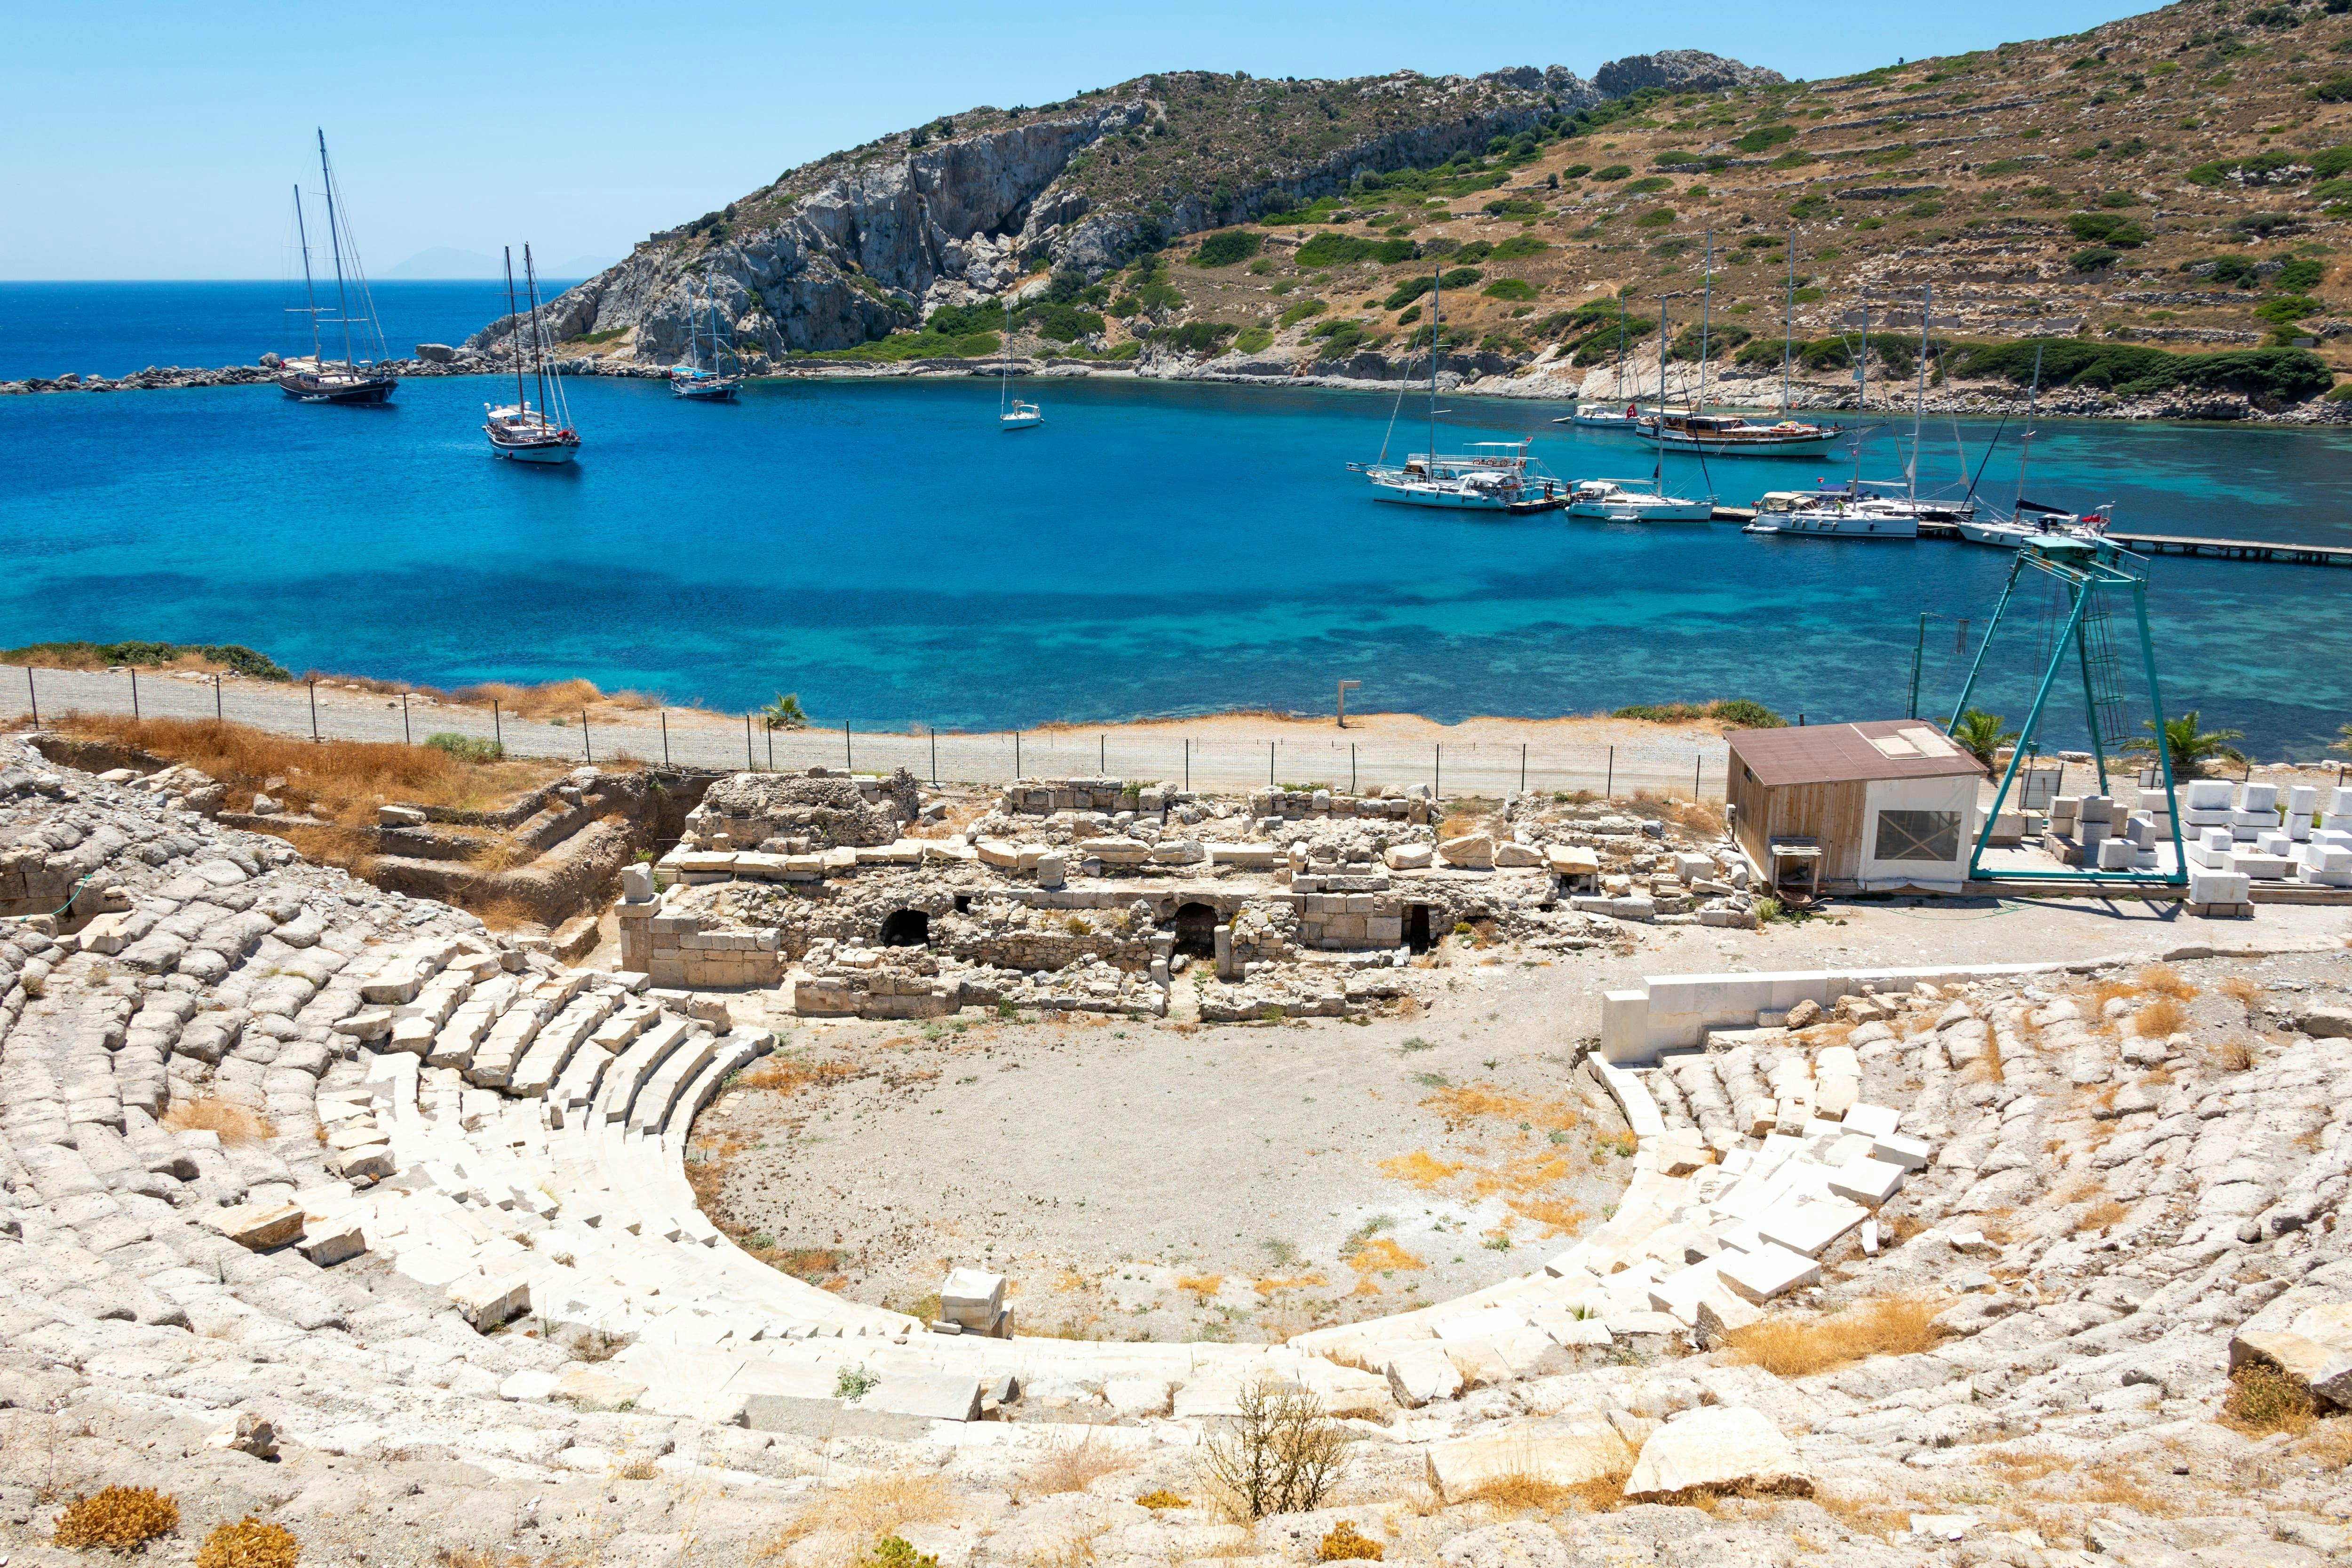 Private Datca & Ancient Knidos Tour